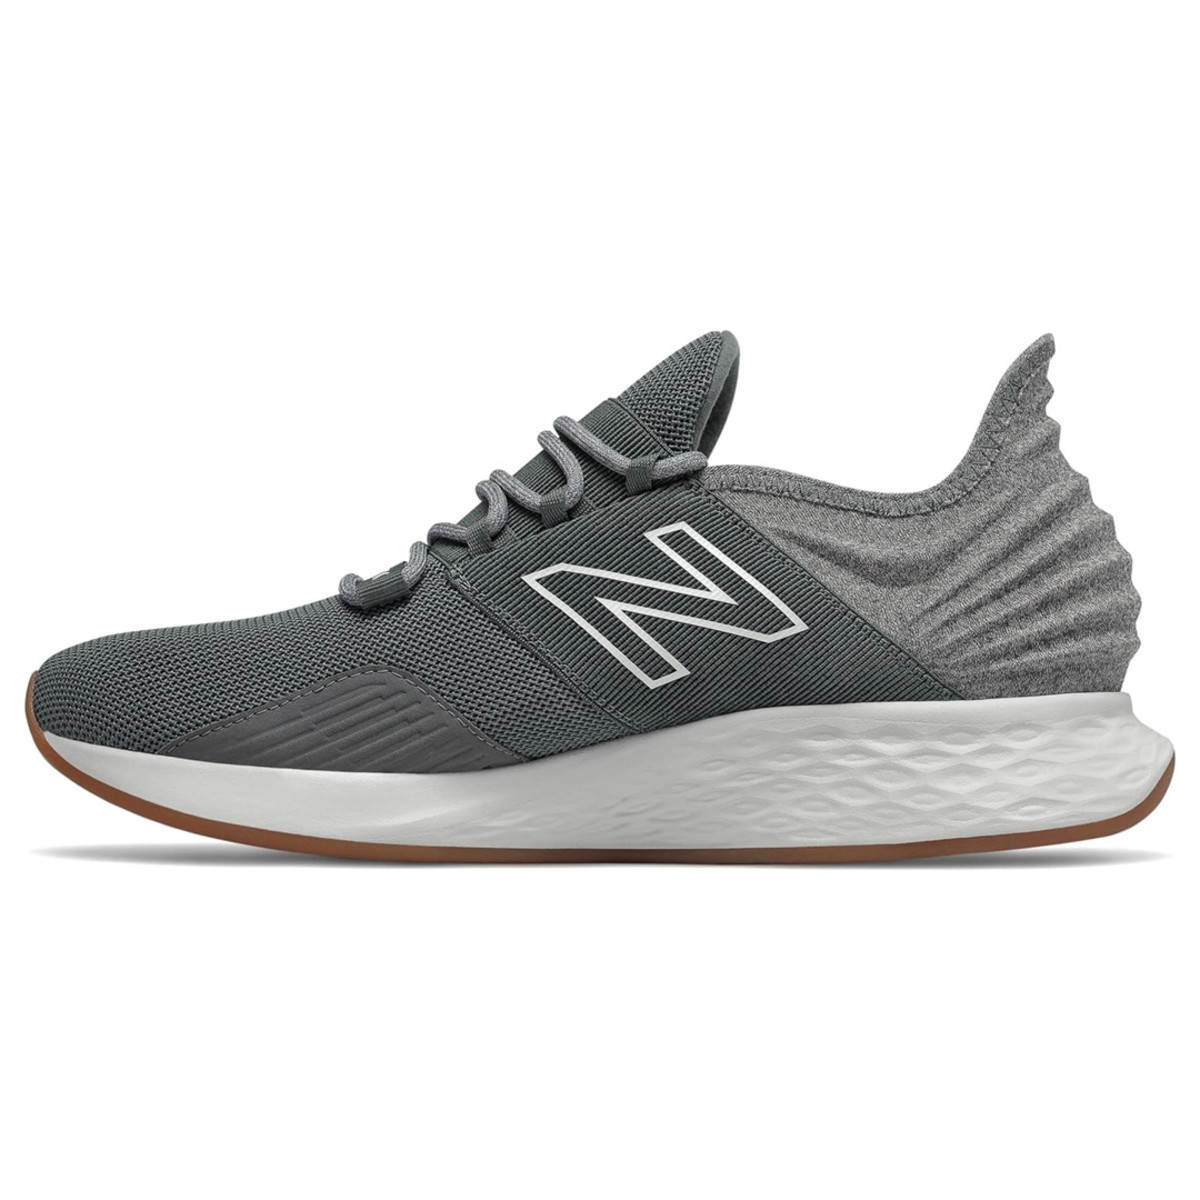 The New Balance Fresh Foam Roav V1 Classic Sneakers in Lead/Light Aluminum are on sale right now at Amazon